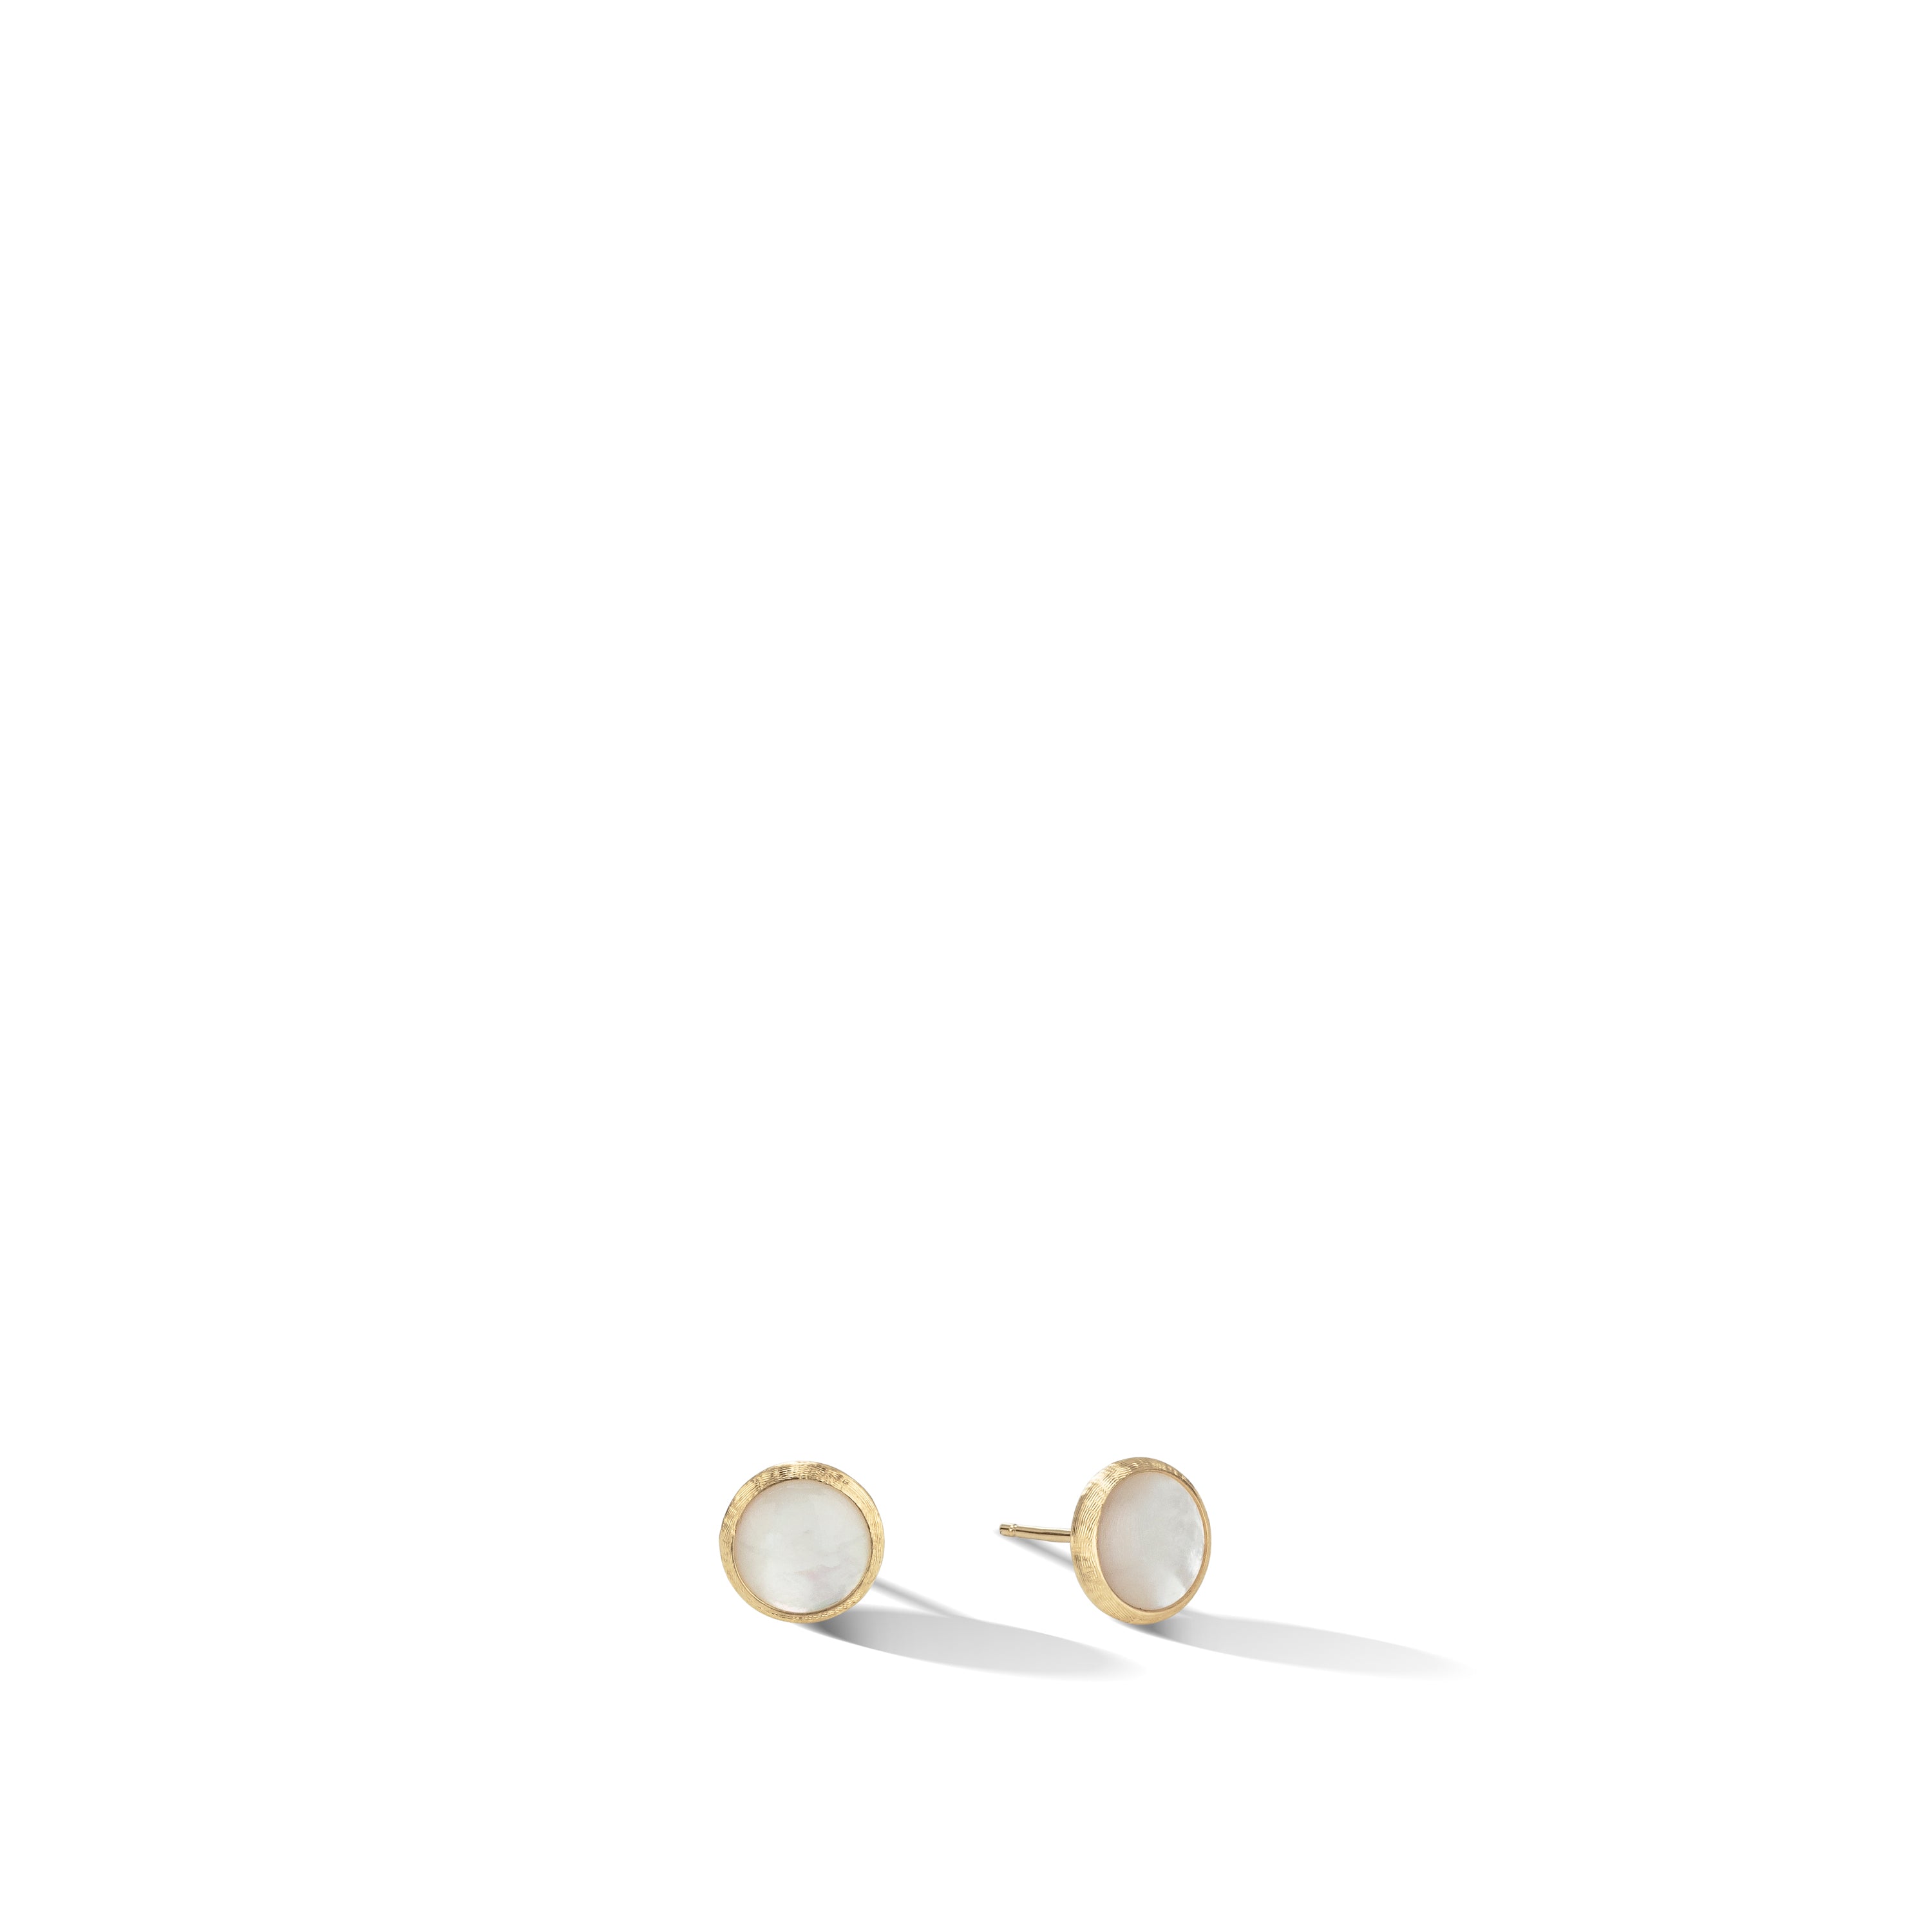 MARCO BICEGO 18K YELLOW GOLD MOTHER OF PEARL EARRING STUDS